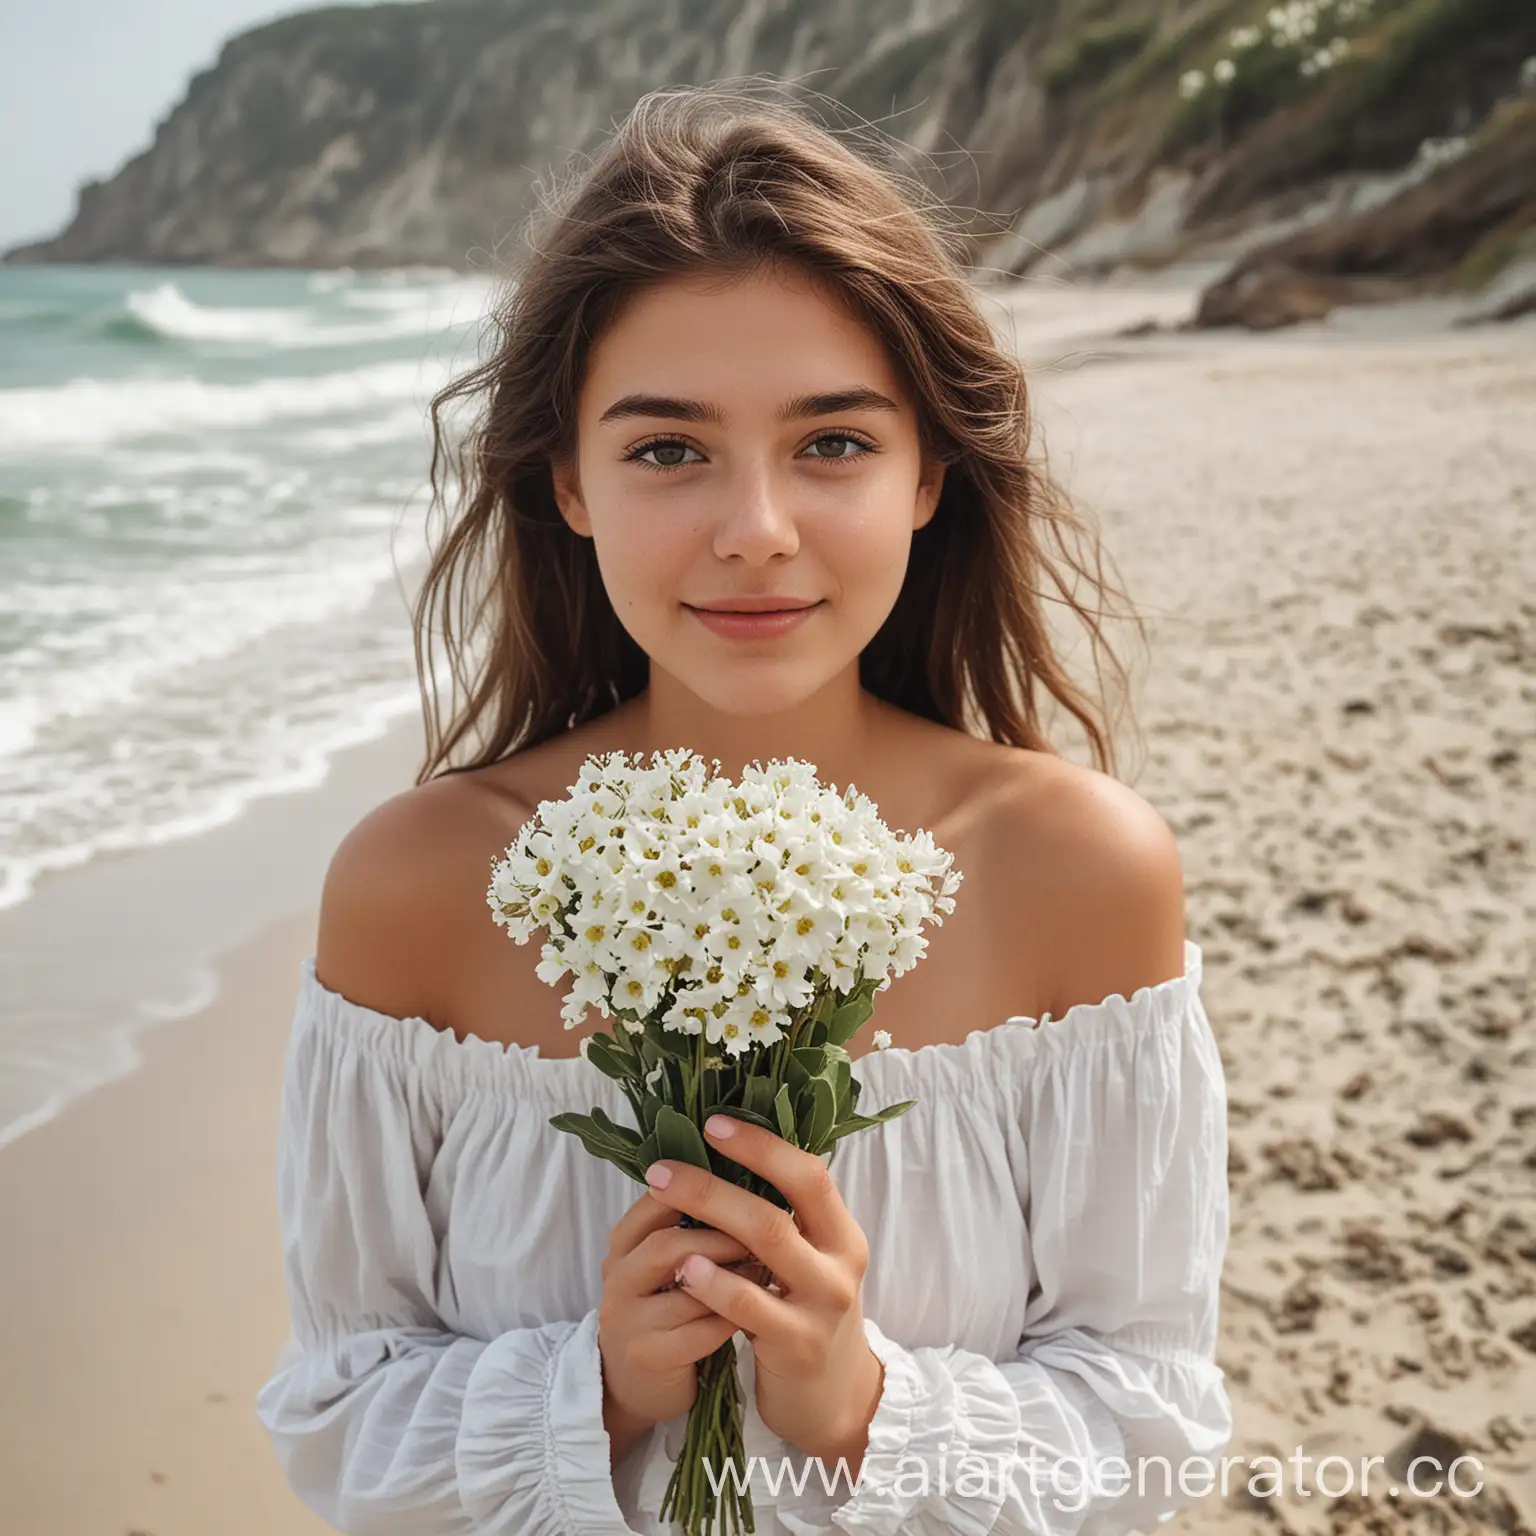 Young-Woman-Holding-White-Flowers-on-Beach